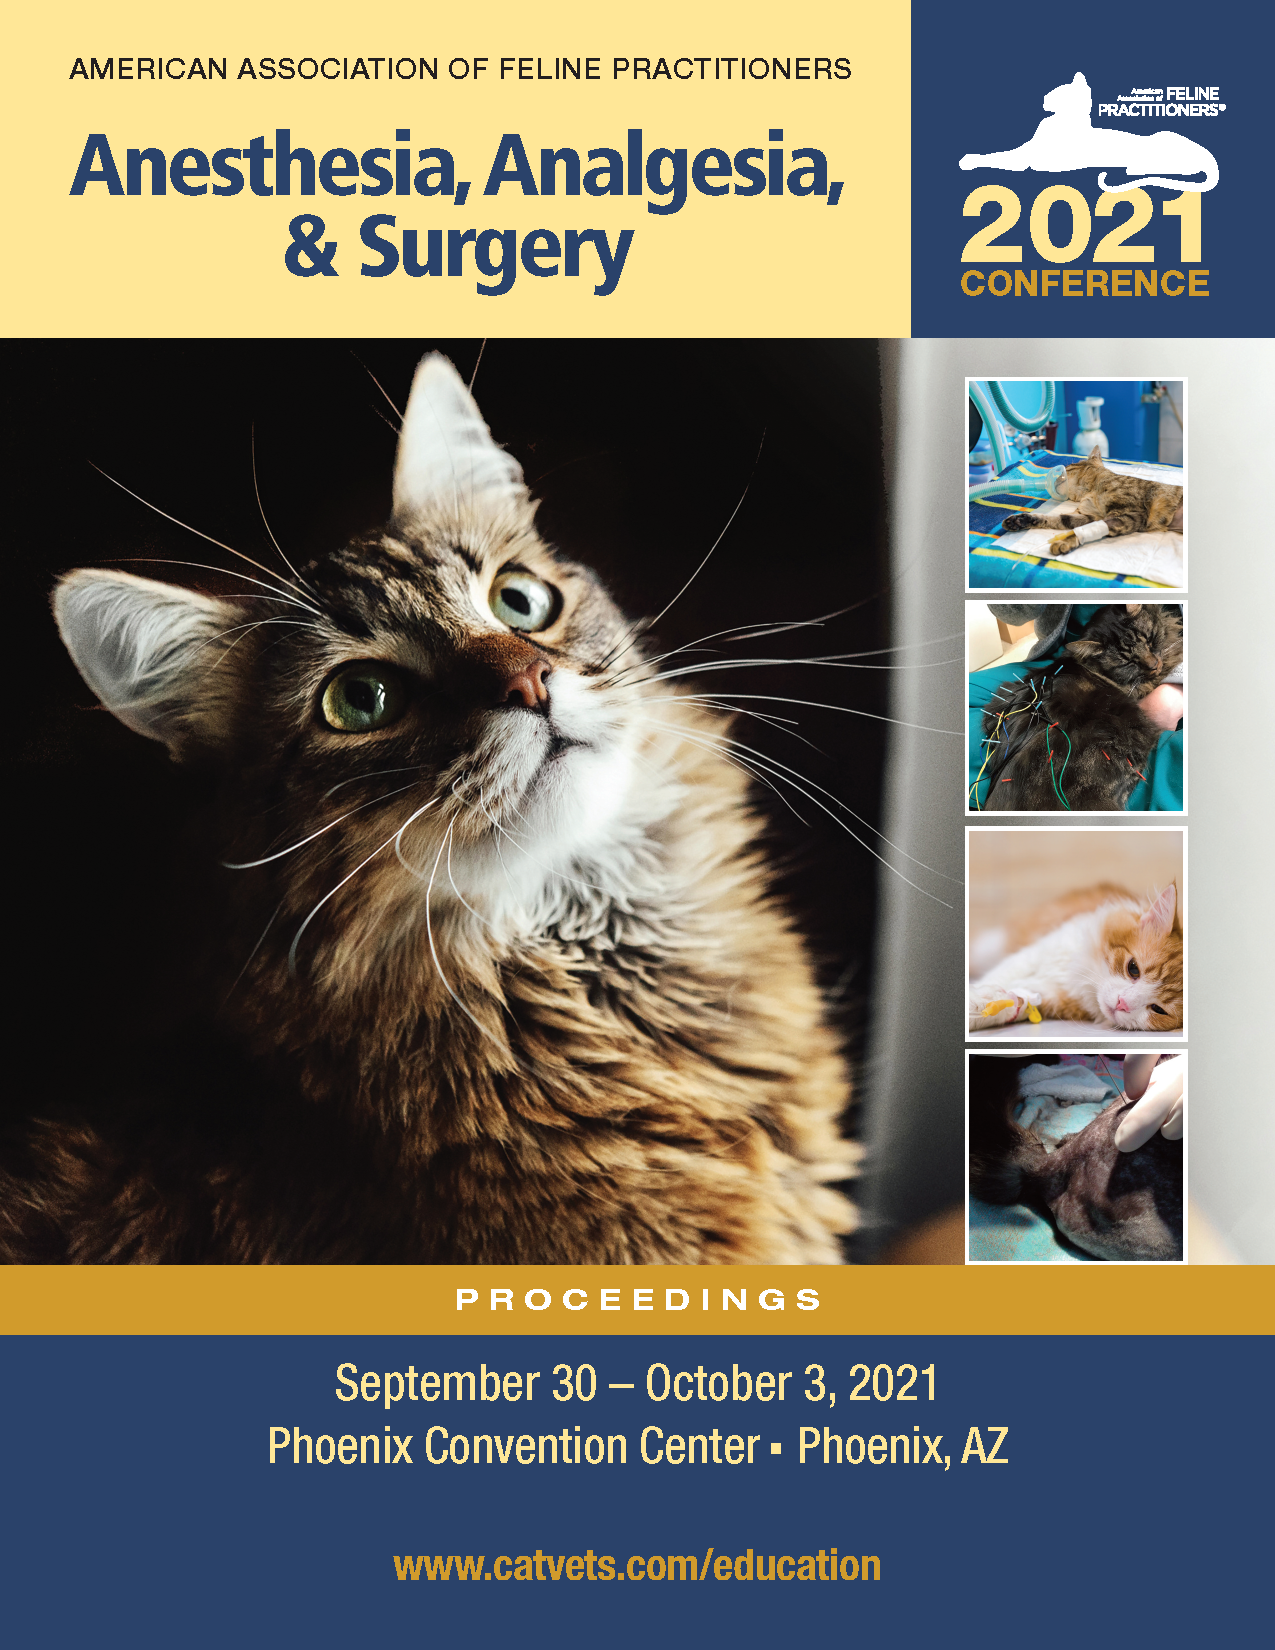 2021 AAFP Annual Conference Proceedings